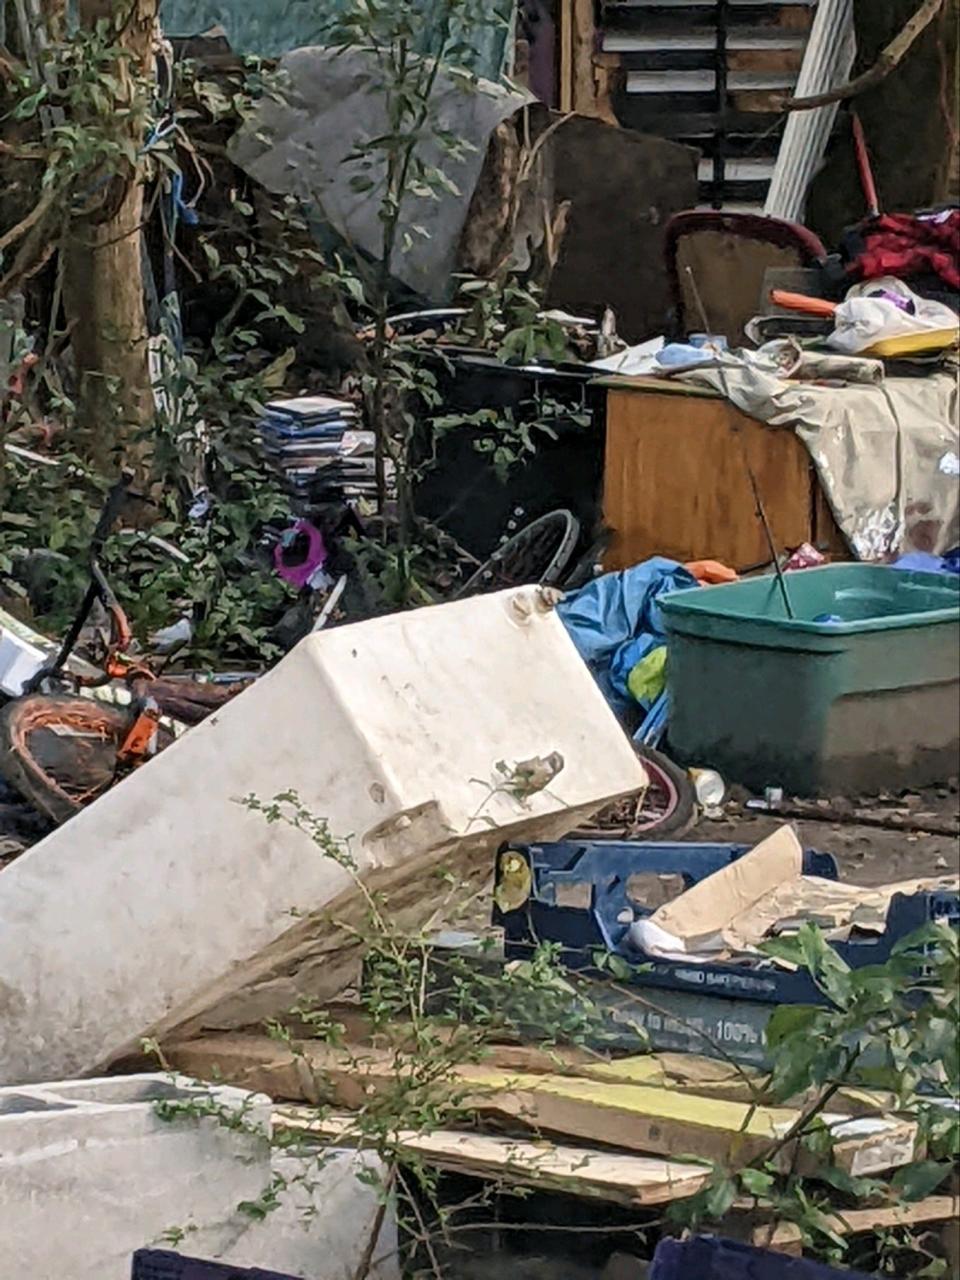 An Escambia County magistrate ordered the owners of a property in Brent to clean up a homeless encampment with derelict structures, trash and abandoned vehicles by April 21, 2023, but two days before the deadline no action had been taken.